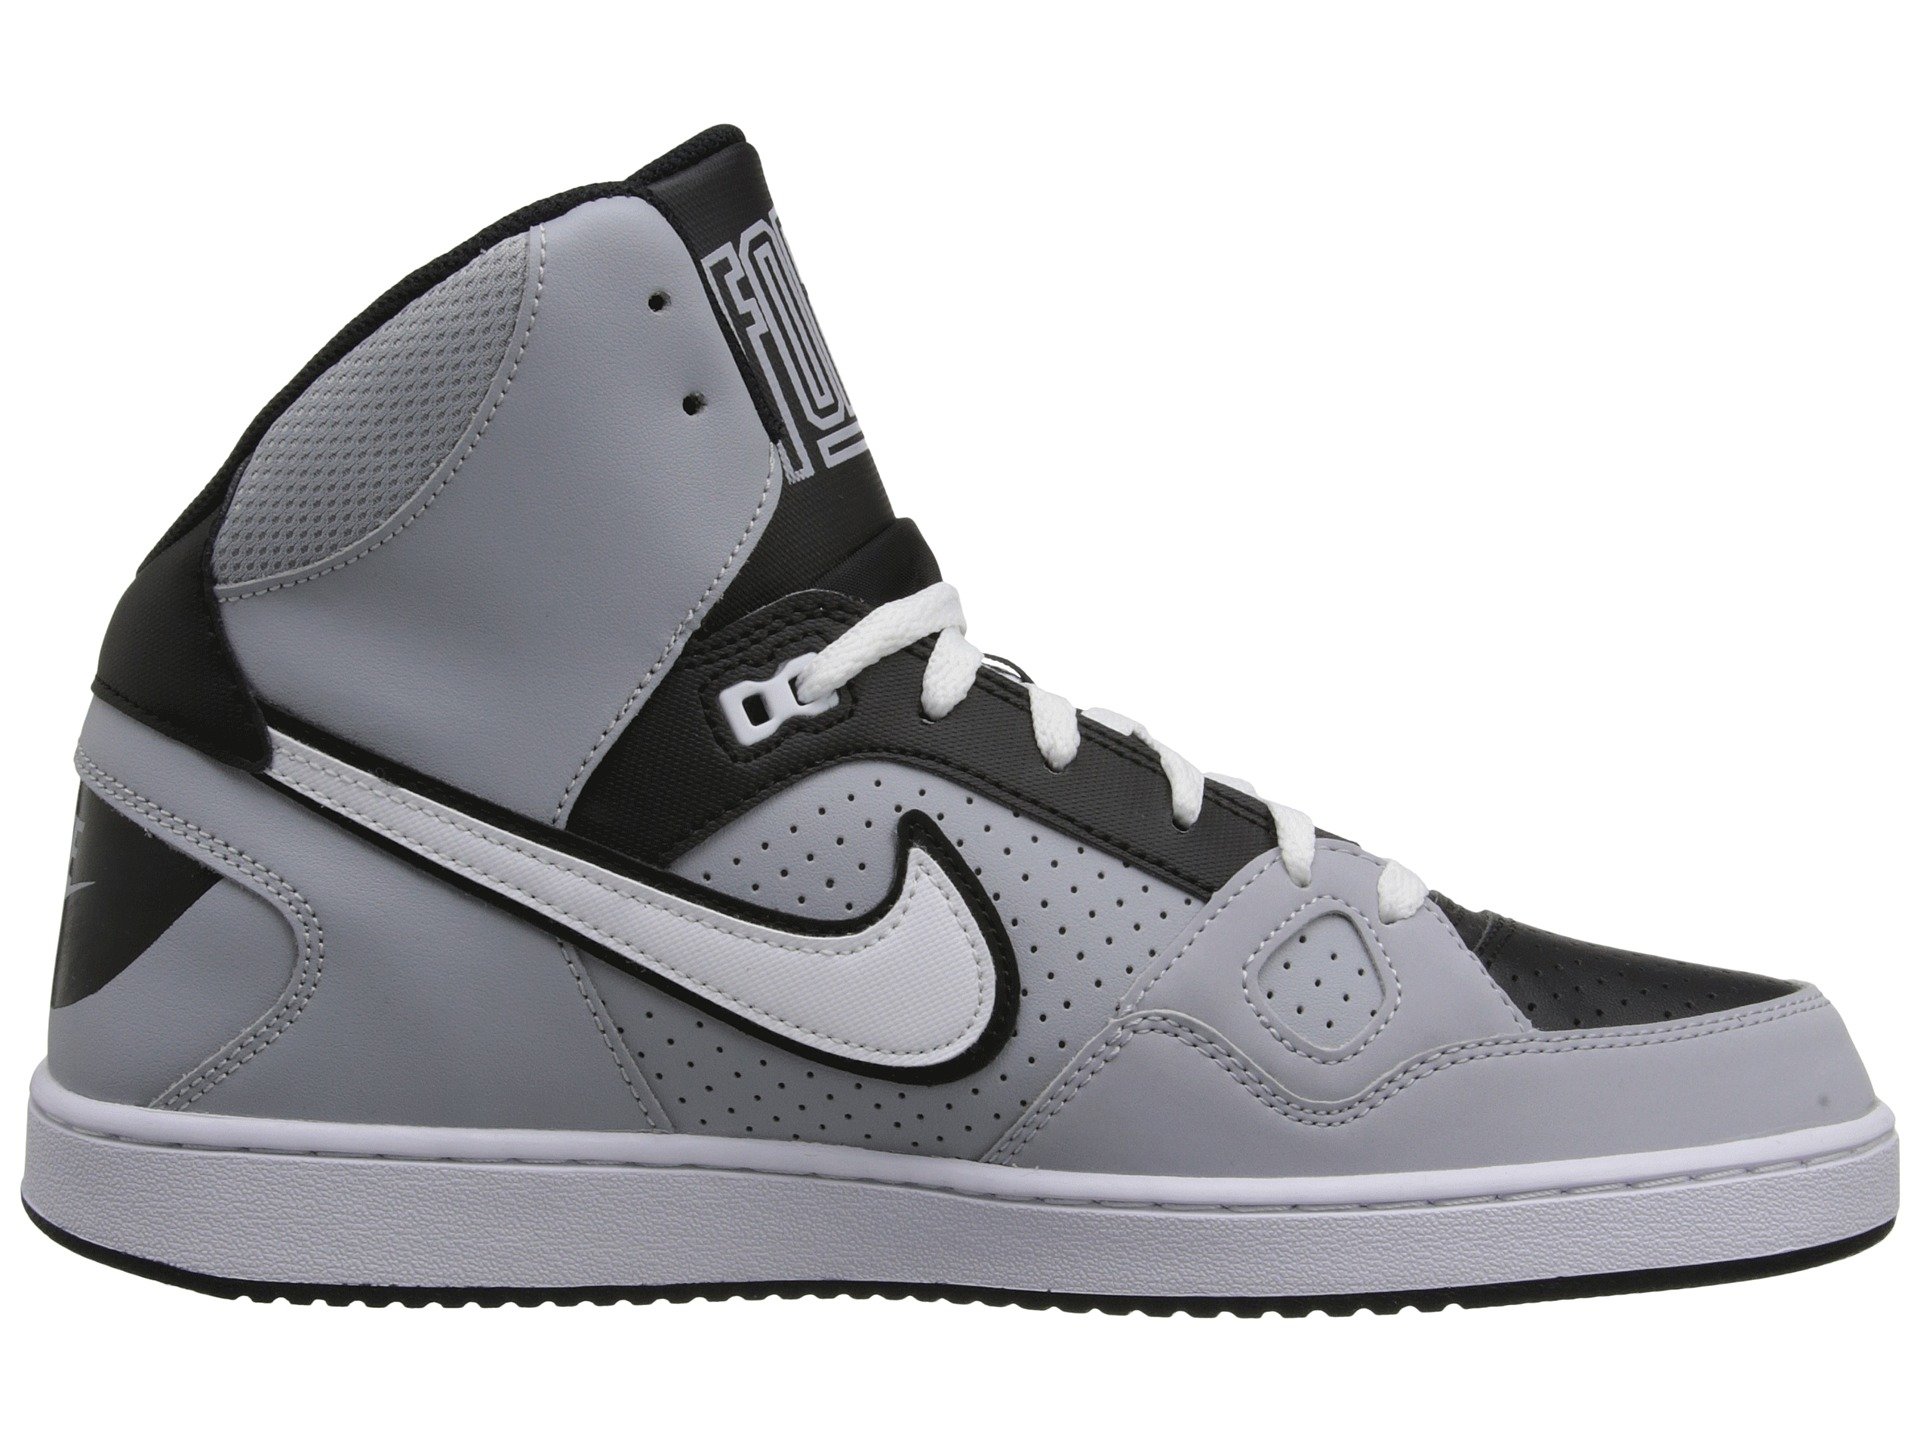 nike son of force mid grey